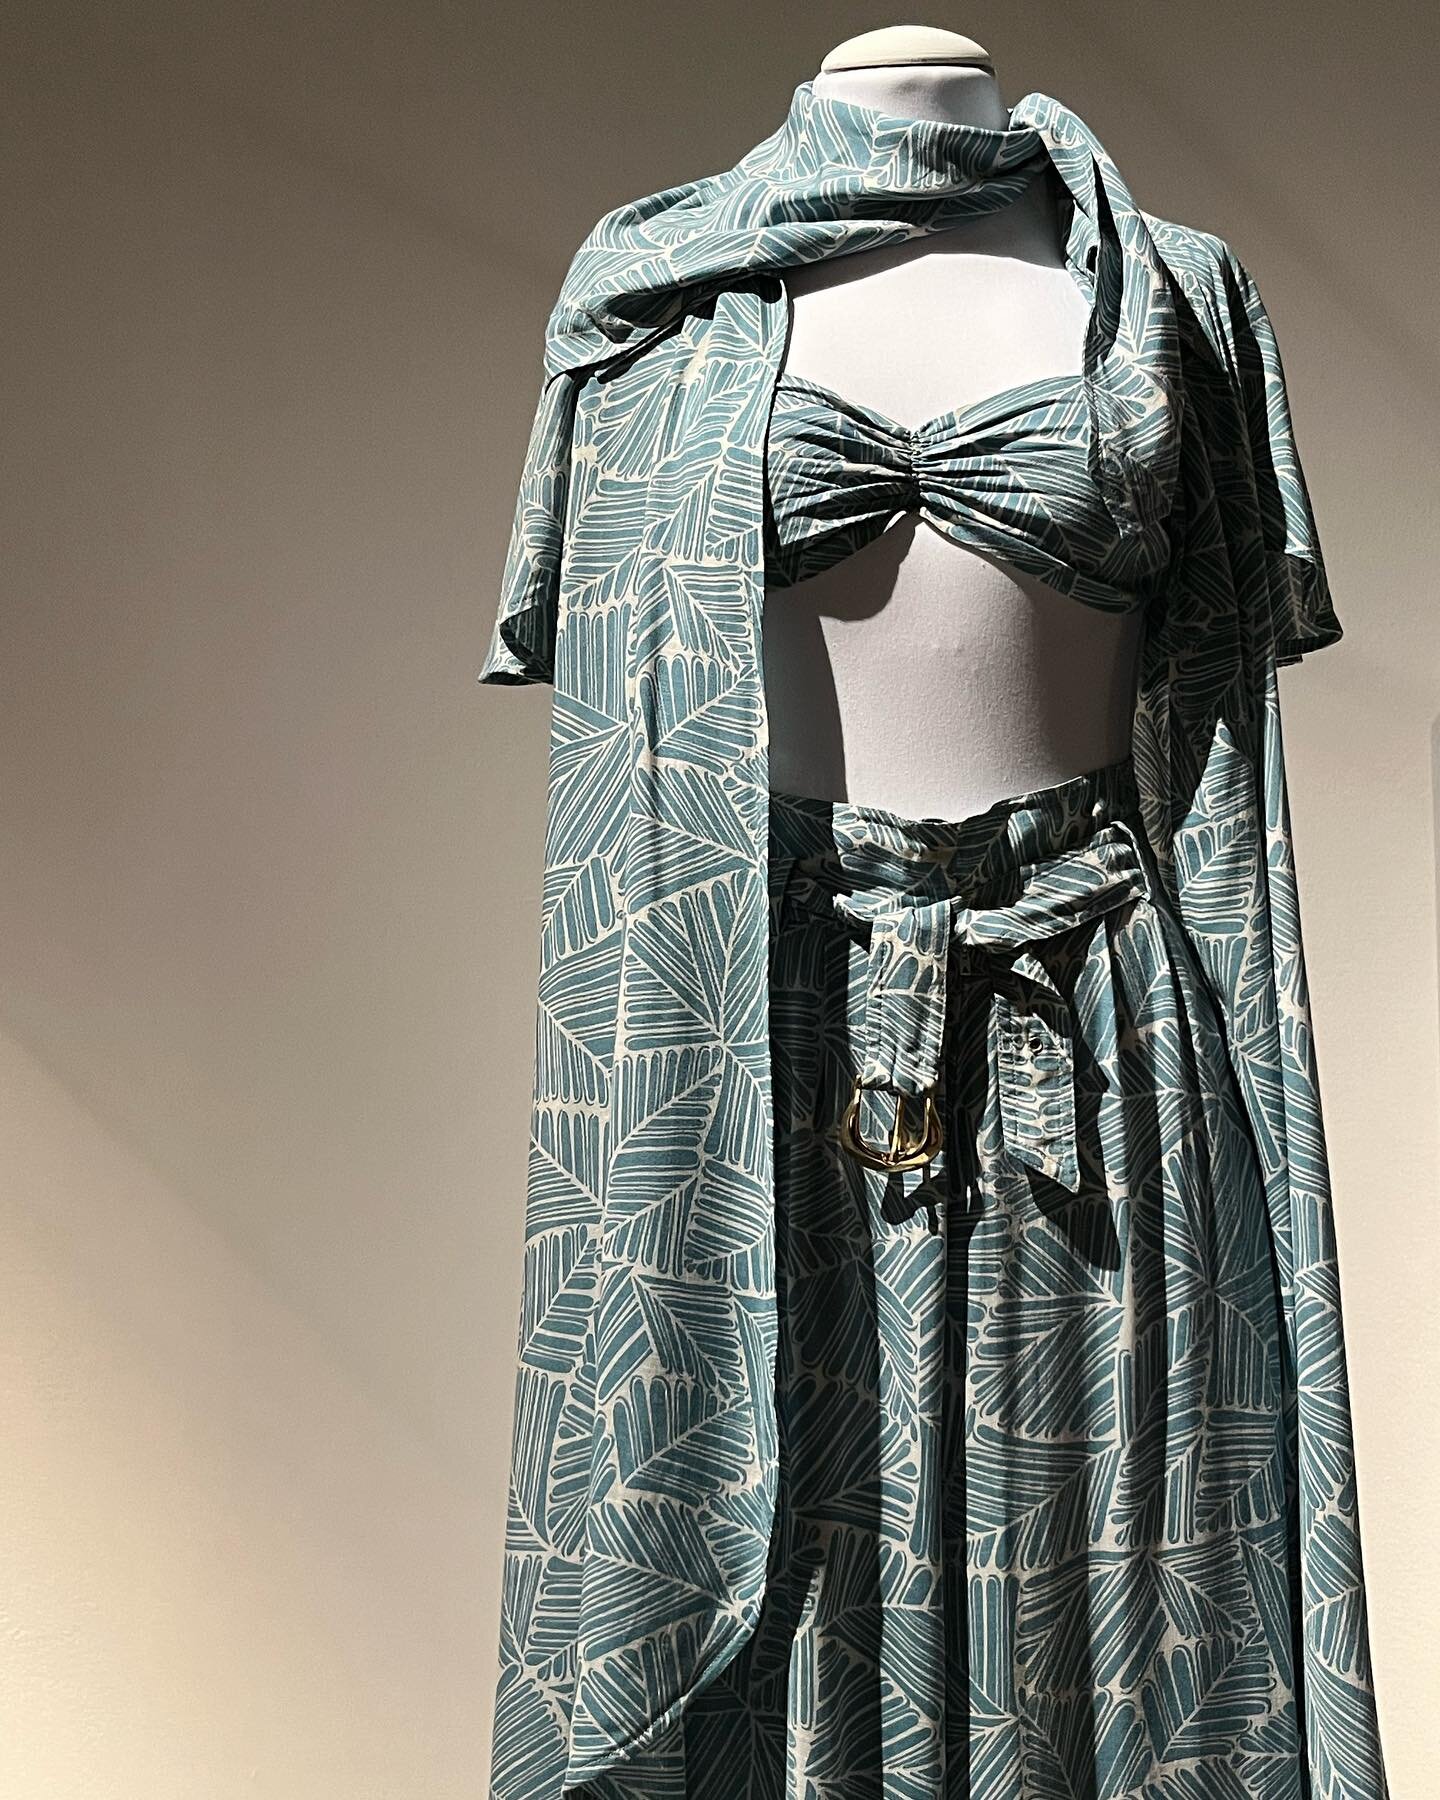 We were literally breathless at the beauty and timeless elegance of Walter Albini&rsquo;s clothes, displayed at the @museodeltessuto in the exhibition dedicated to the designer and absolute pioneer of Made in Italy fashion.

&ldquo;Walter Albini. The